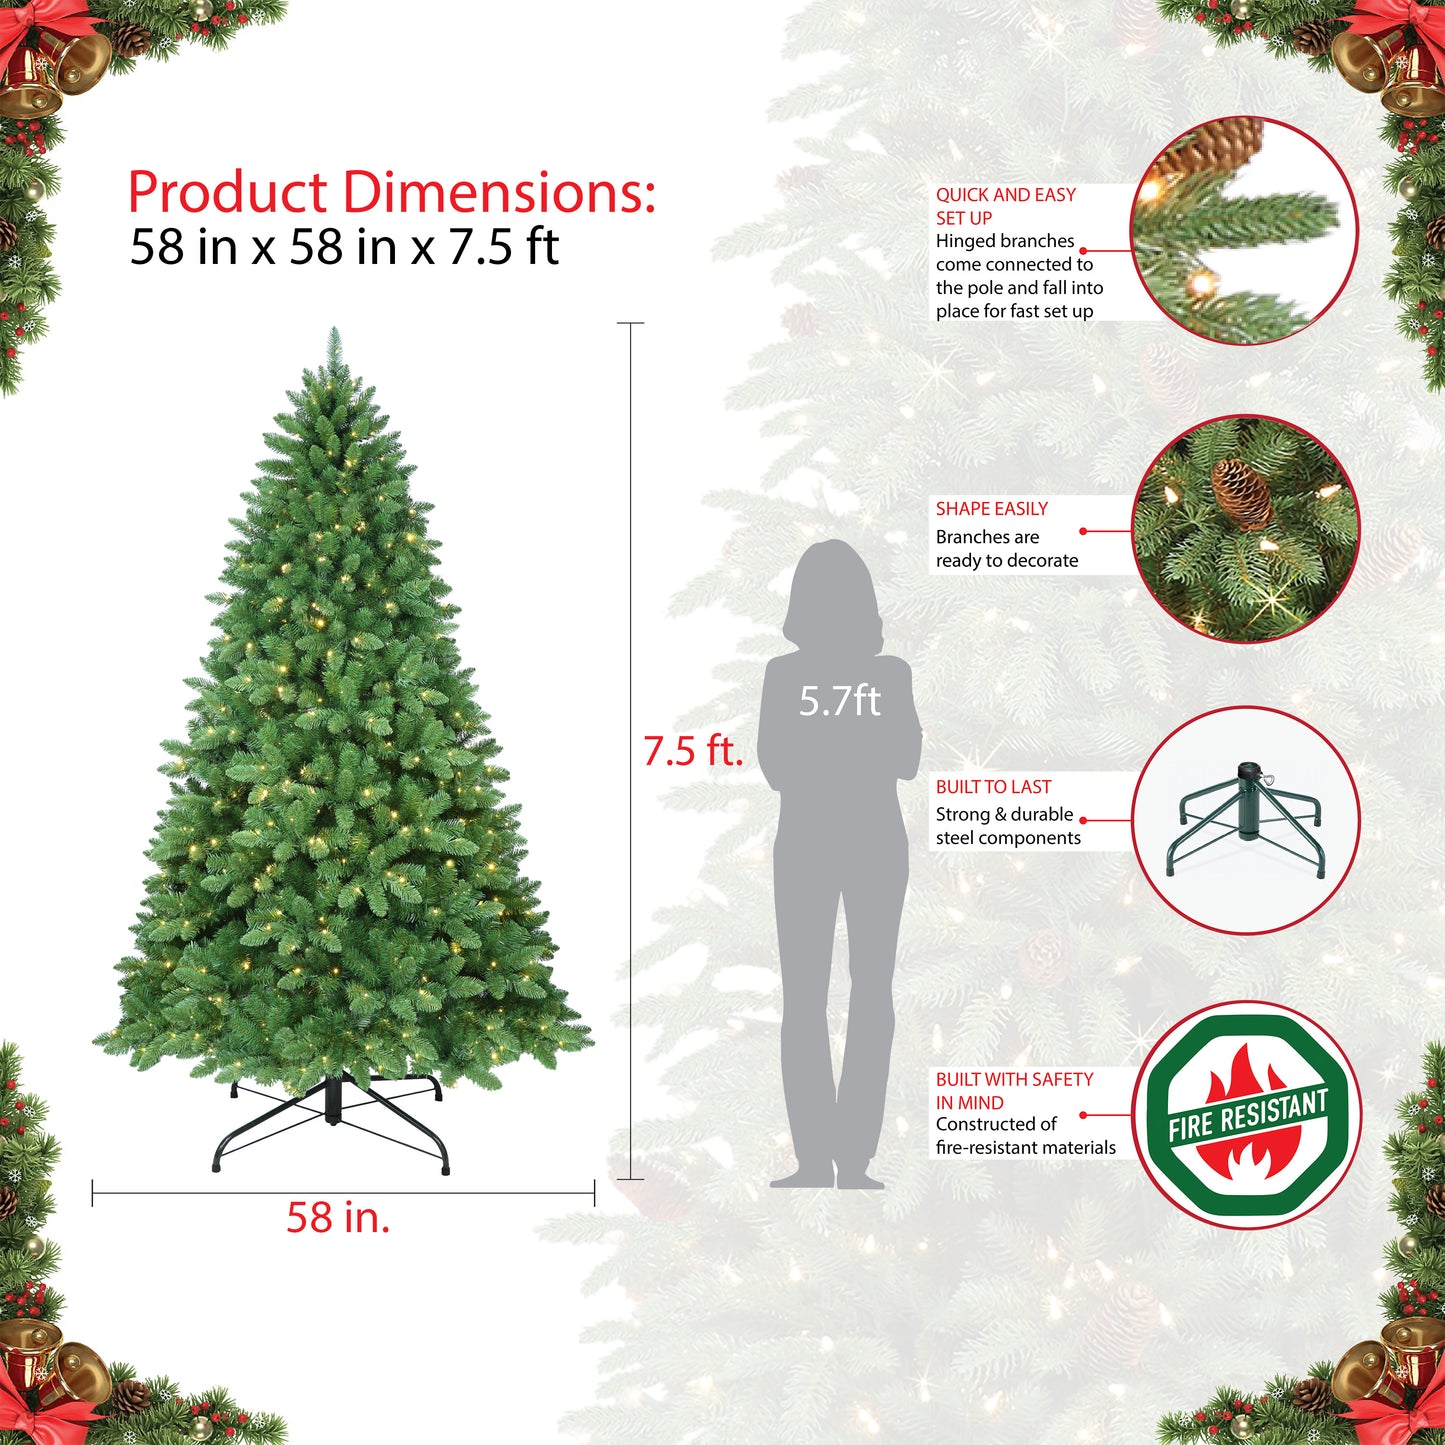 Pre-Lit 7.5' Nevada Spruce Artificial Christmas Tree with 650 Color-Select LED Lights and Sure-Lit Pole®, Green